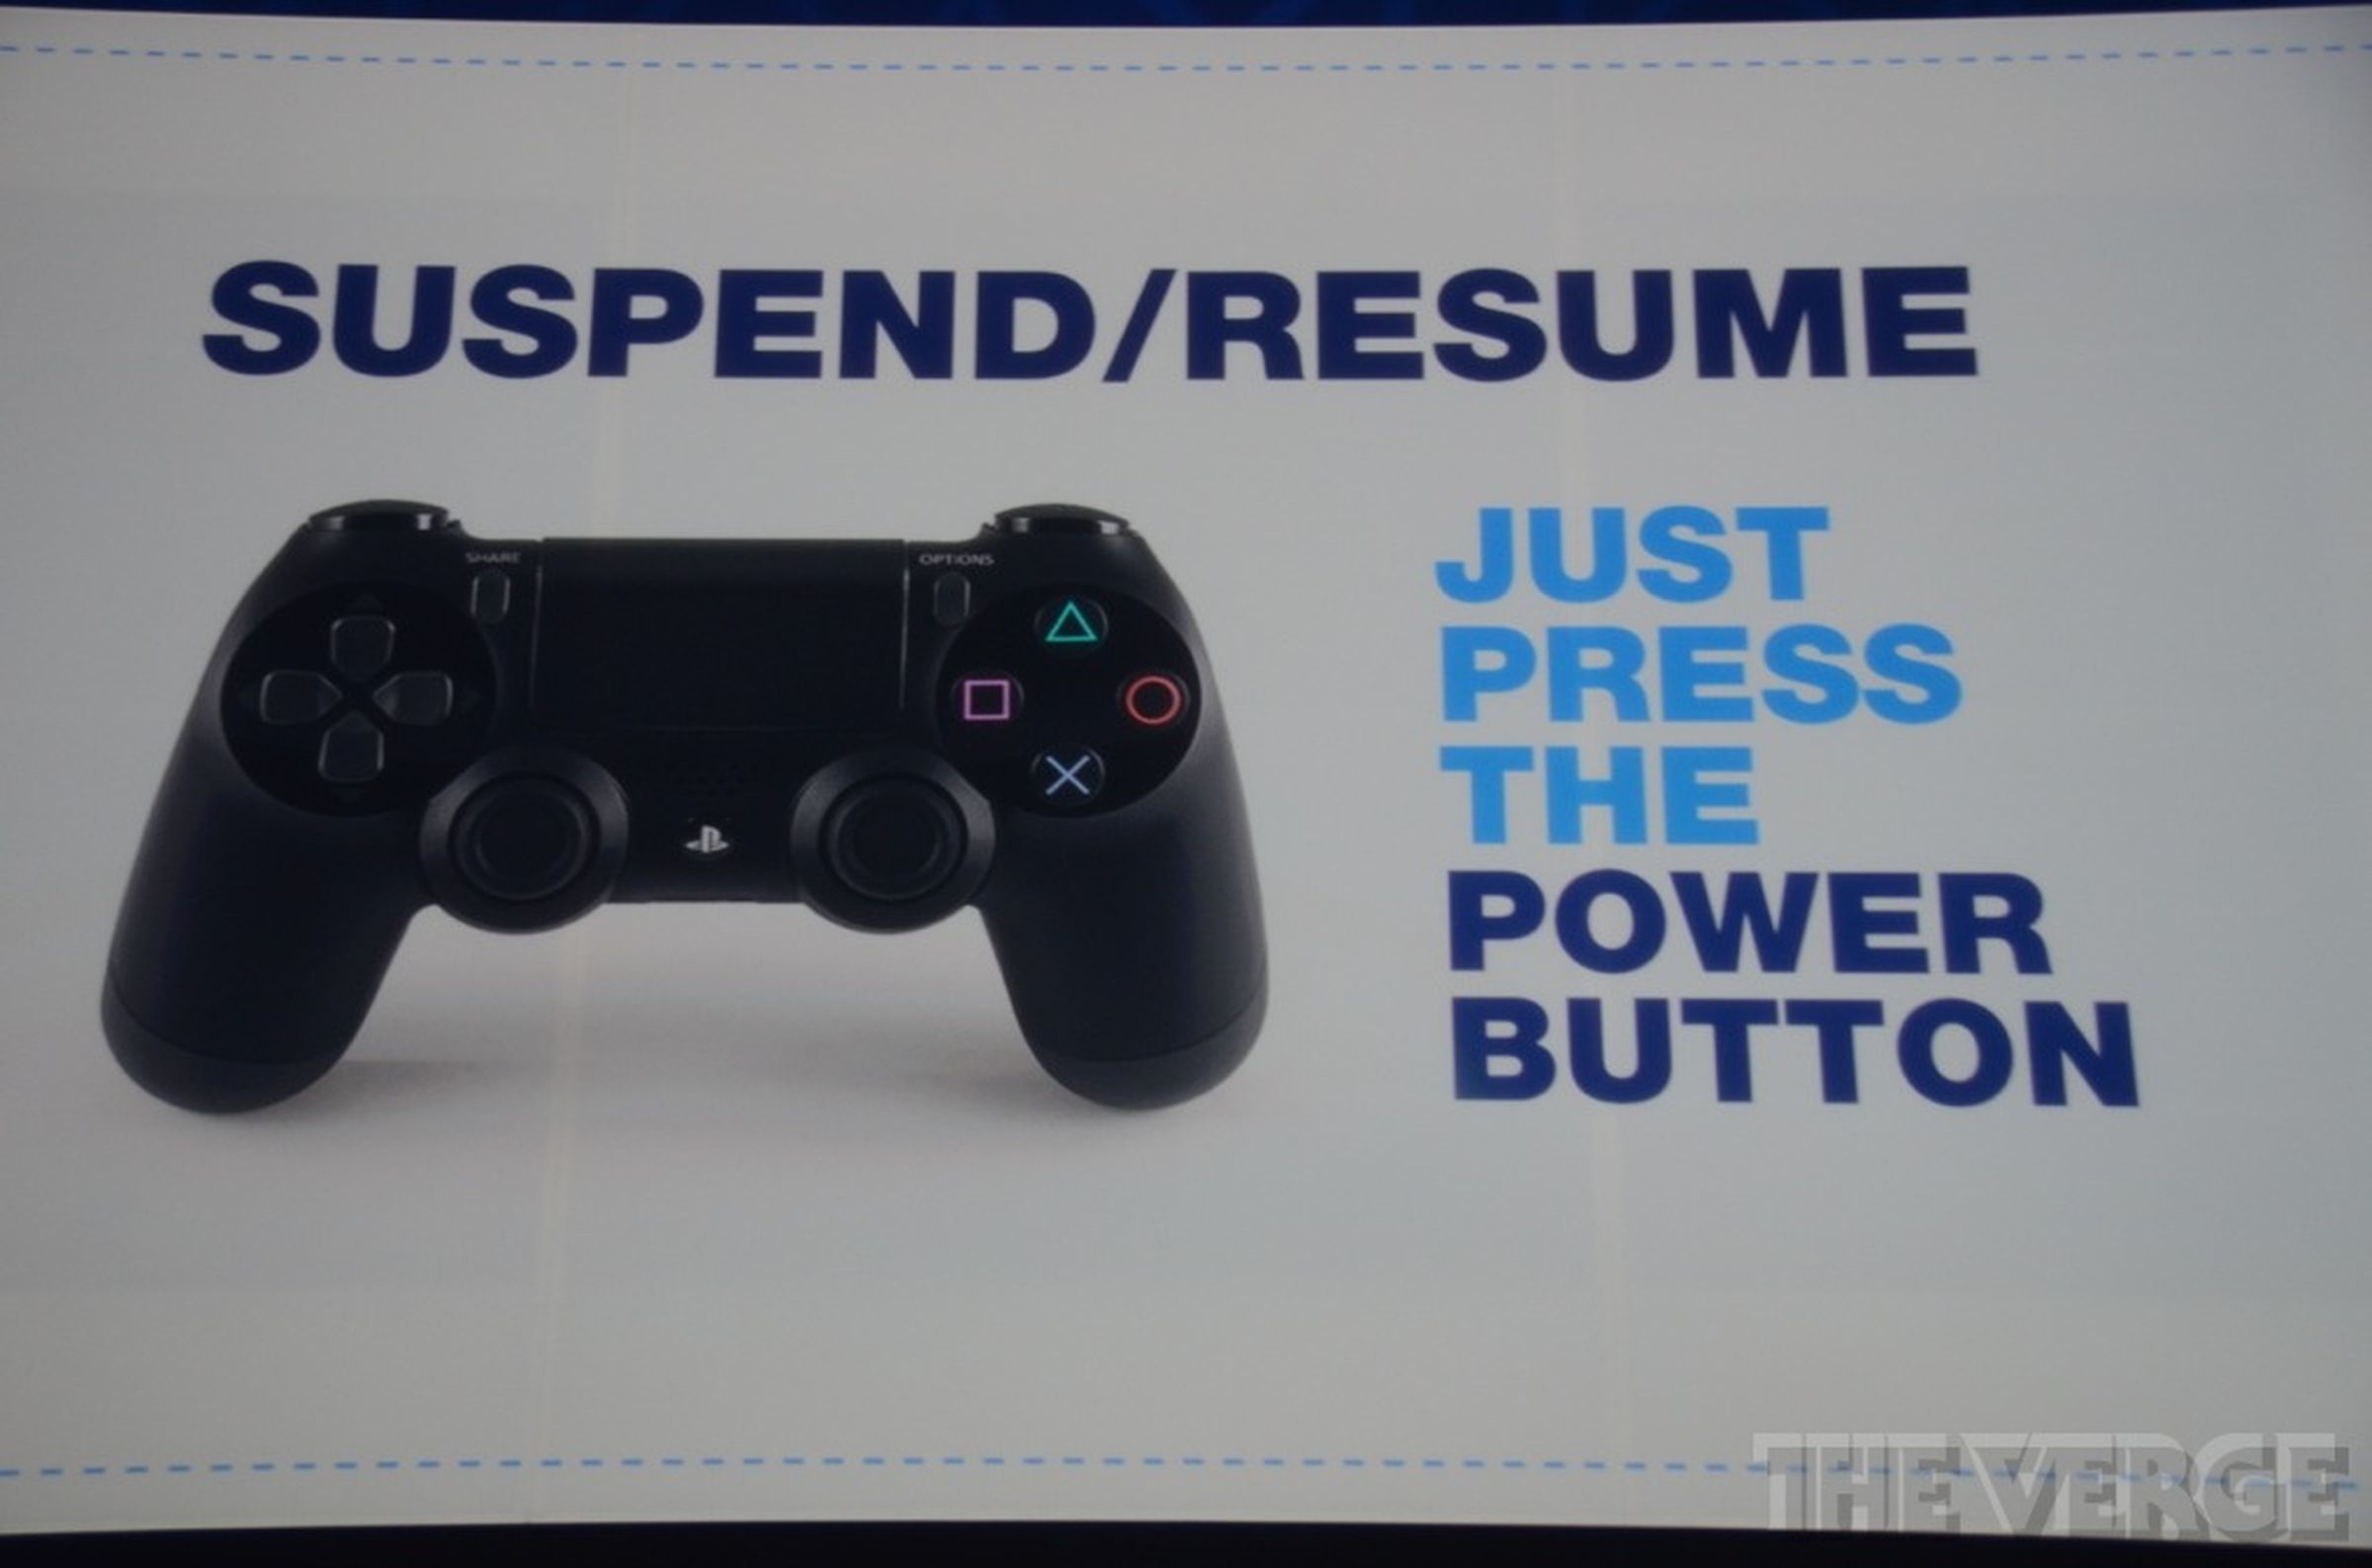 Sony's PlayStation 4 event